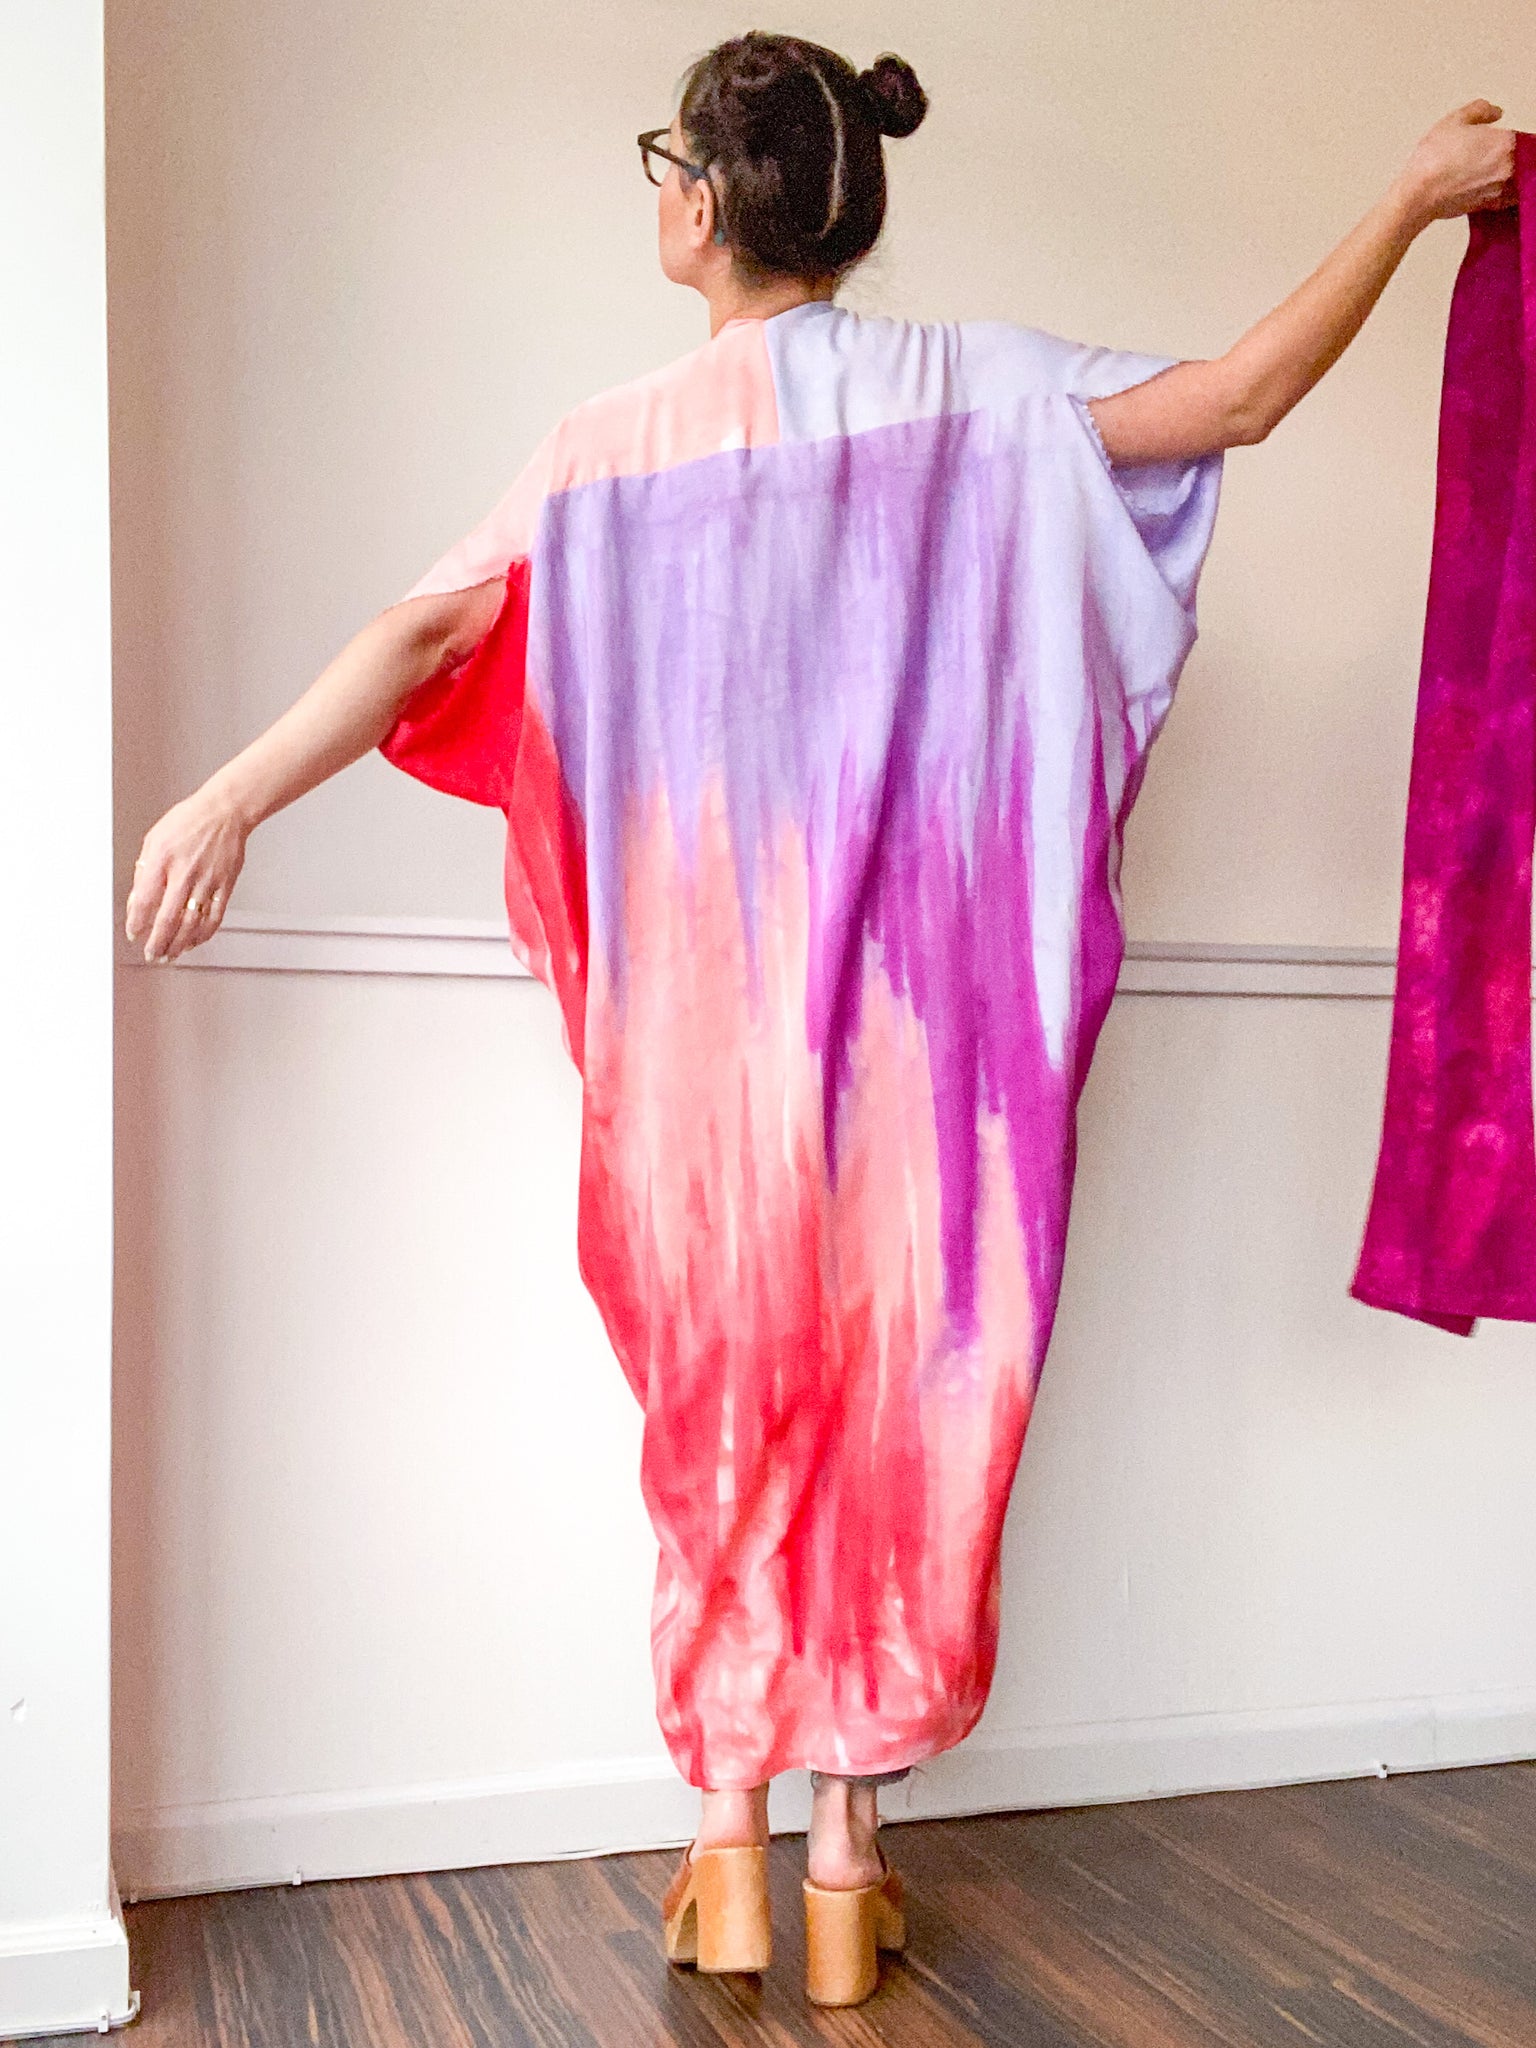 Limited Edition Hand-Dyed High Low Kimono Scarlet Amethyst